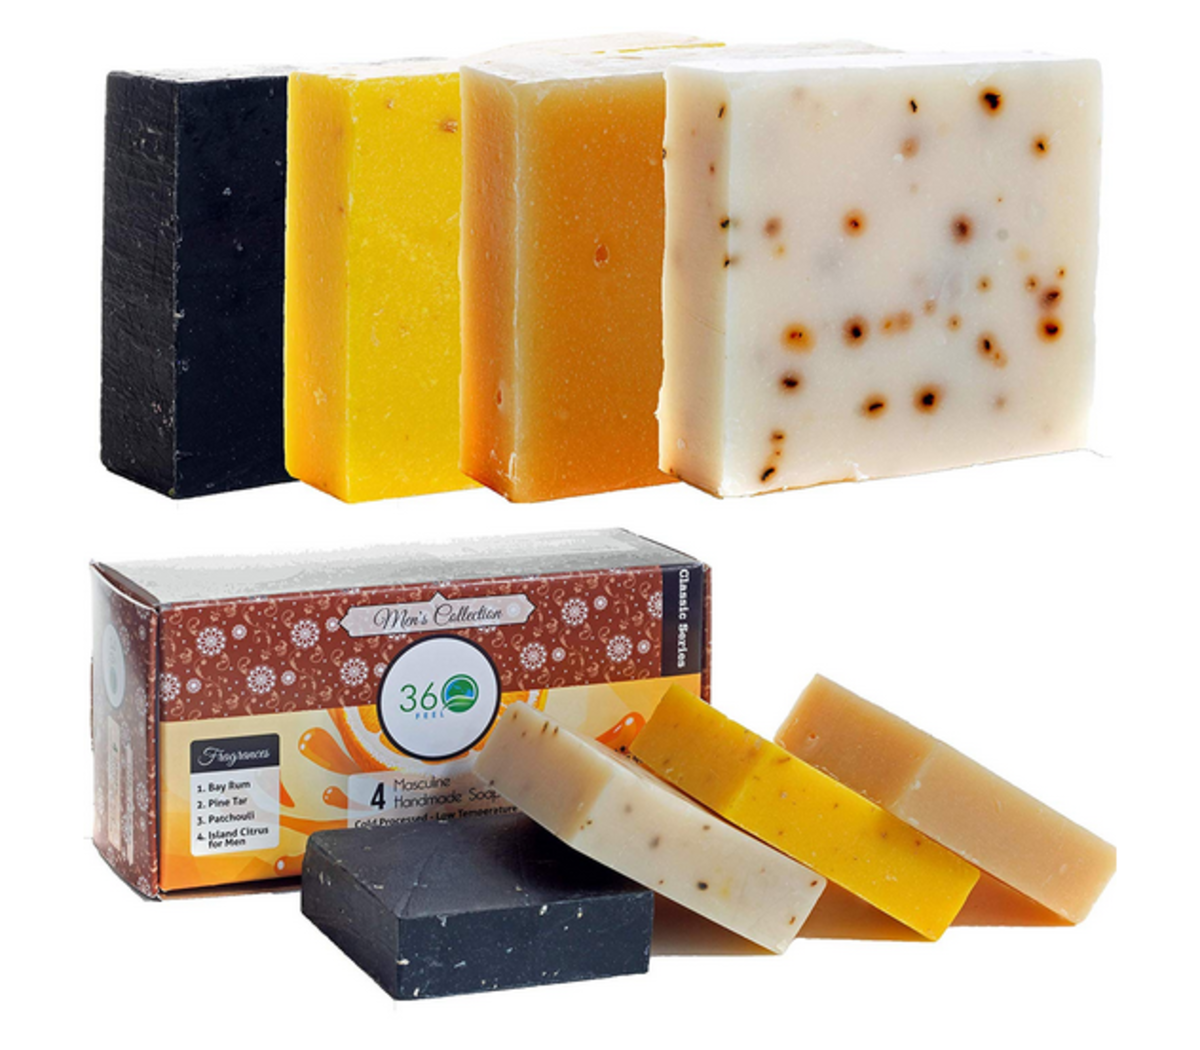 These soaps are Amazon's affordable house brand.